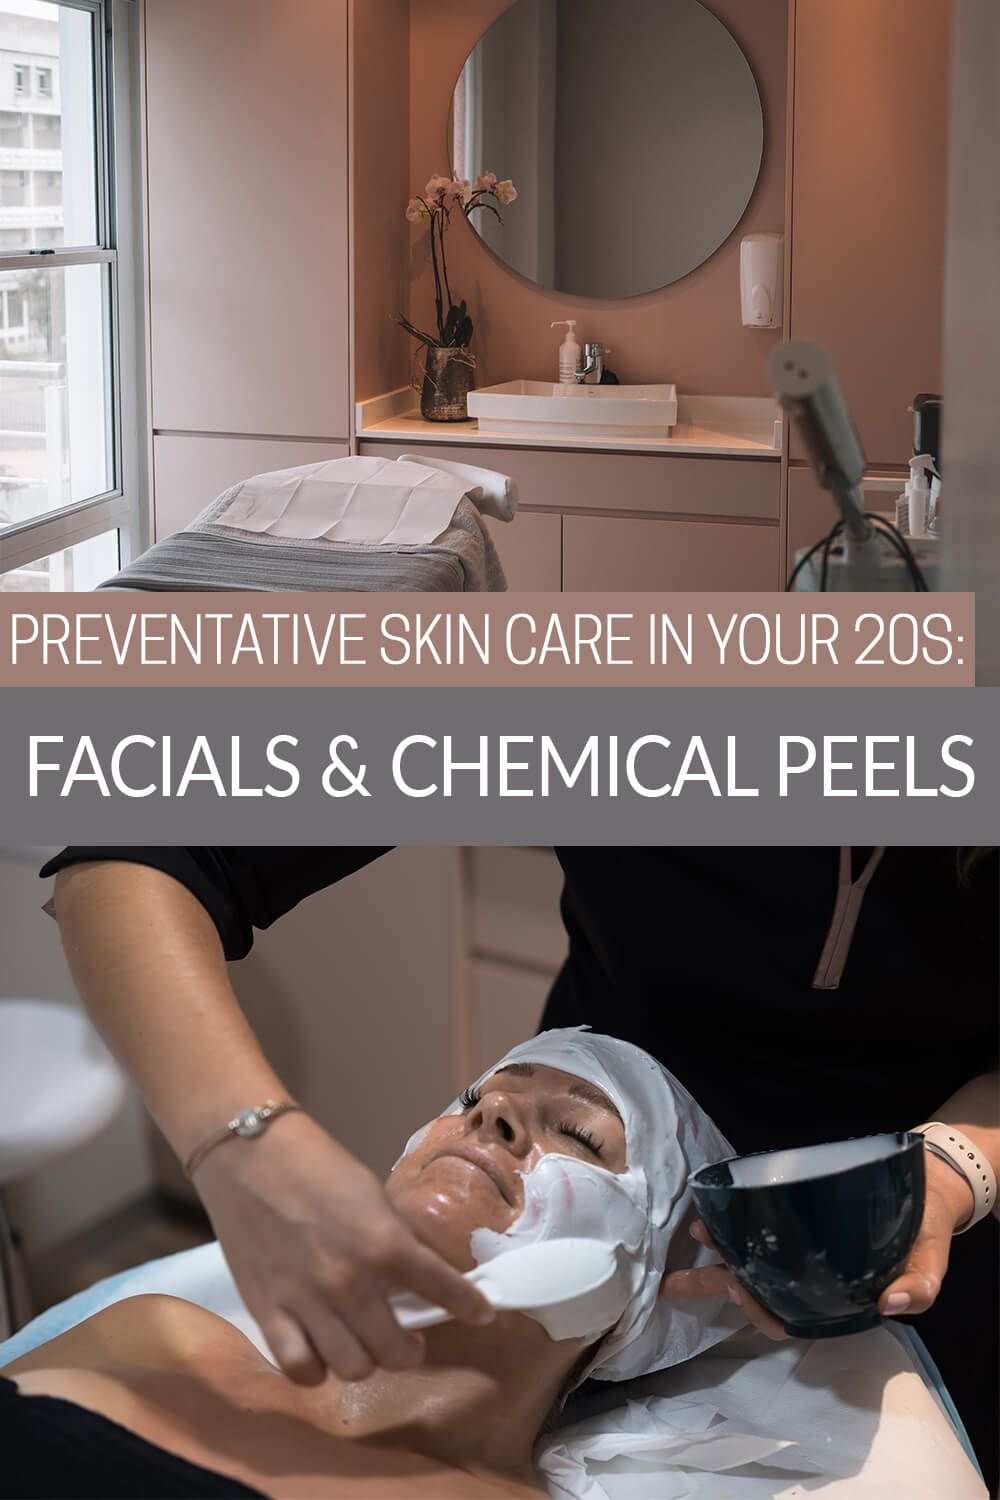 Preventative Skin Care in Your 20s: Facials & Chemical Peels